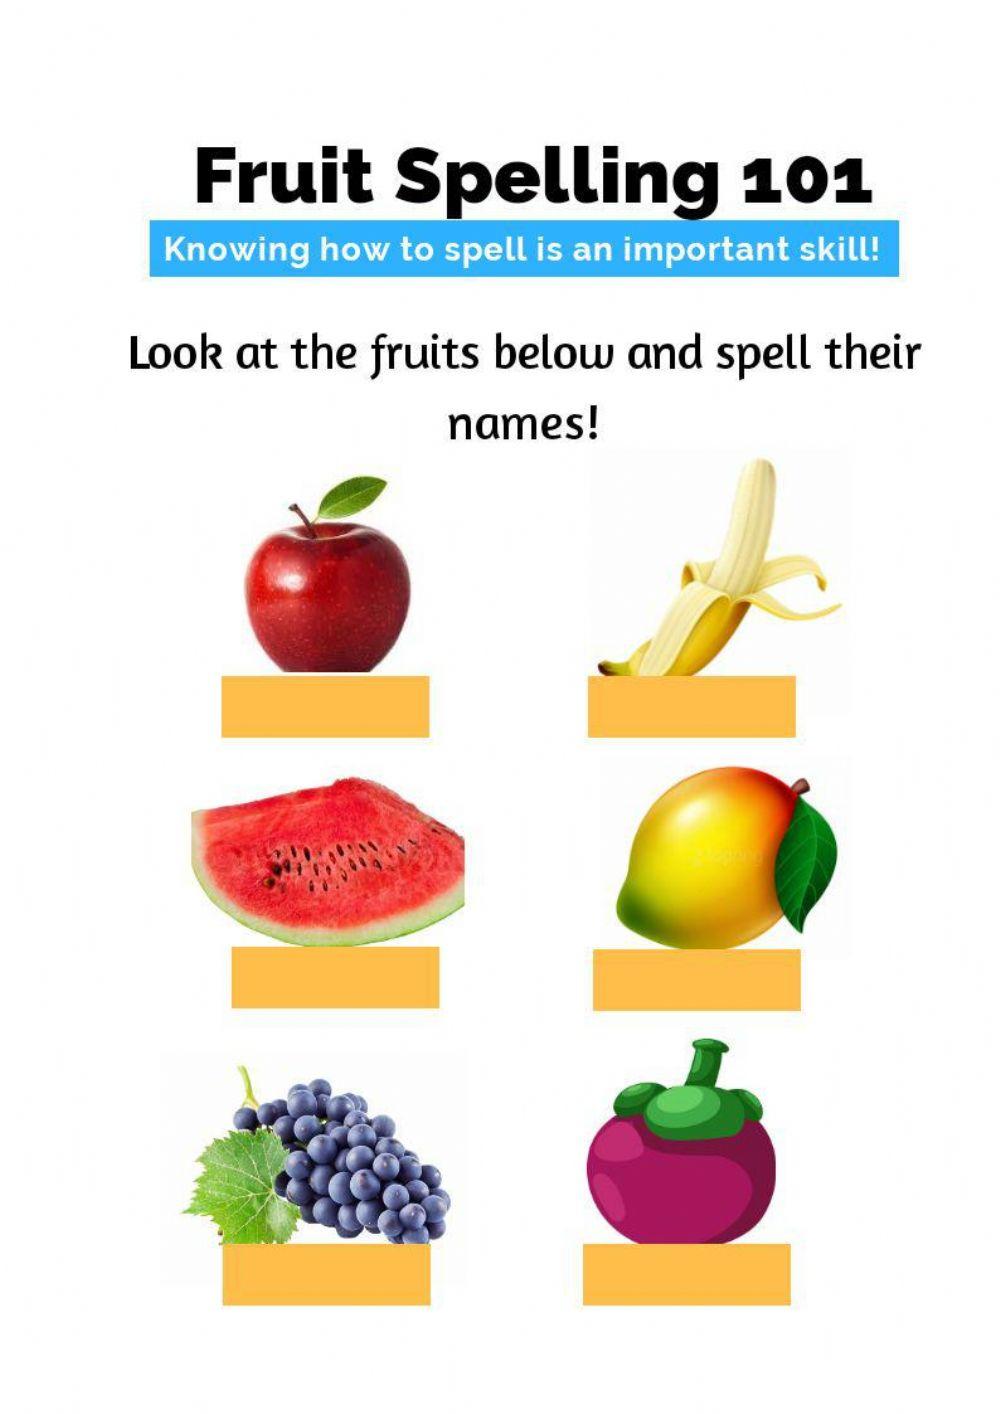 Year 1: fruits spelling